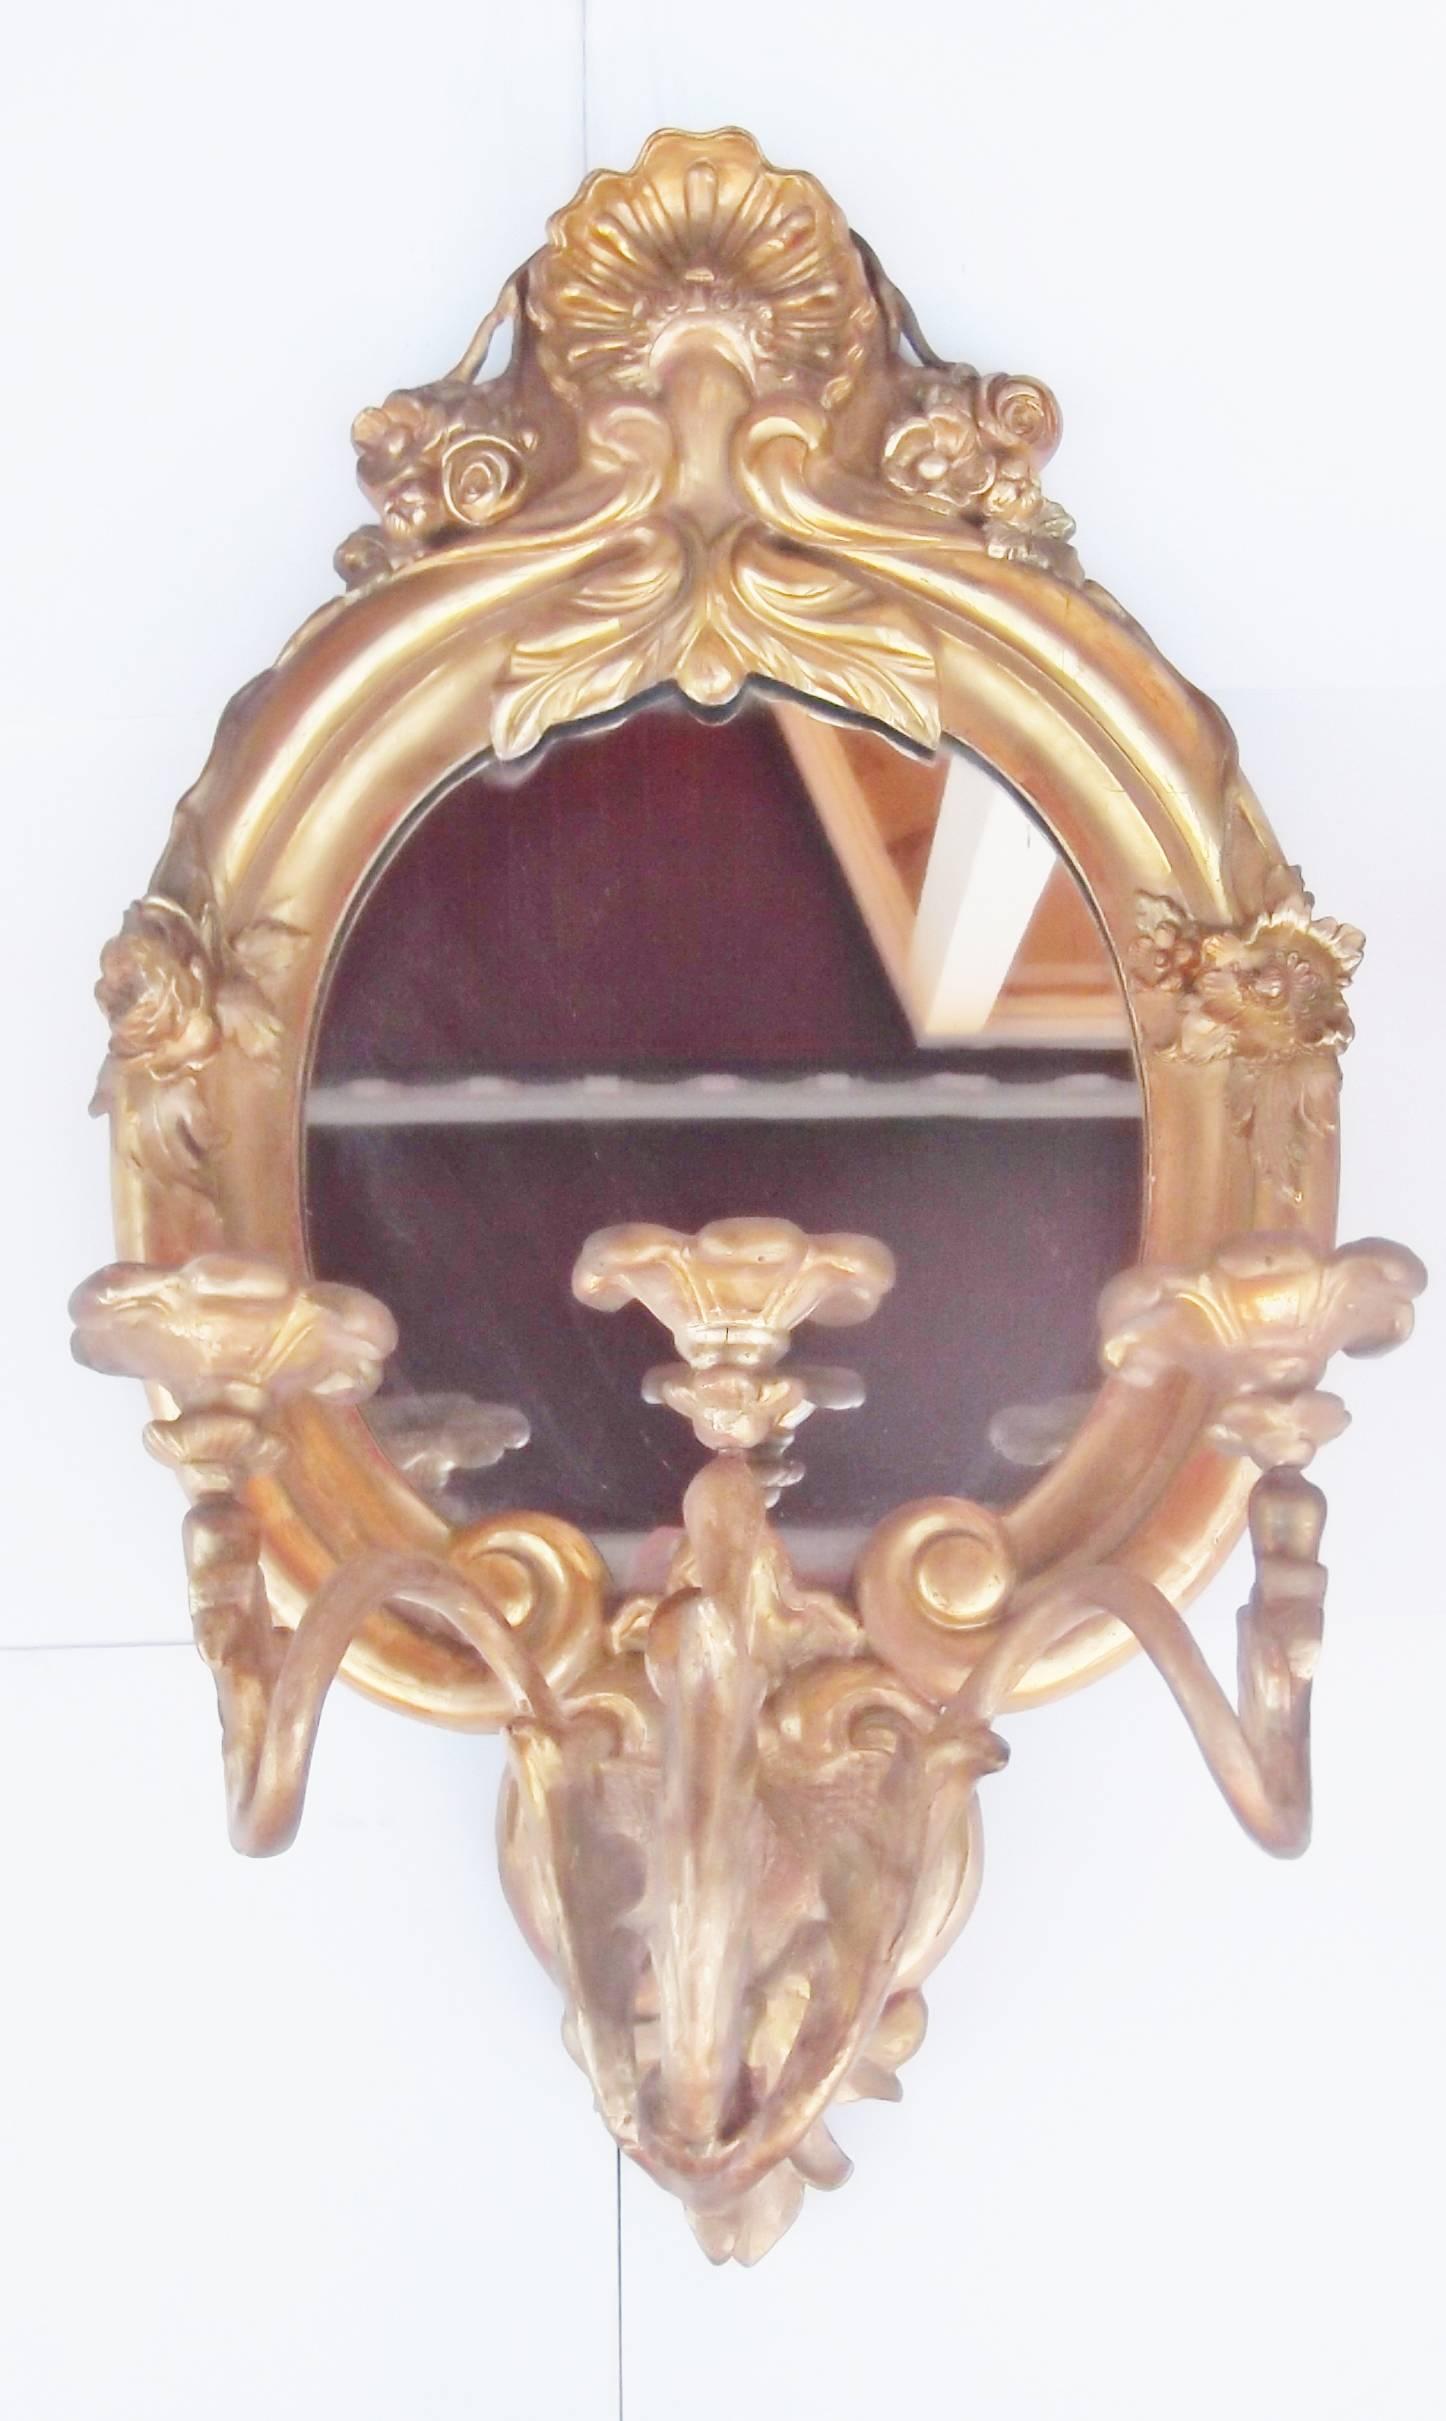 A pair of carved giltwood three-light mirrored girandoles with shell motif tops.
Graceful oval mirror backs with a triple-arm candelabra attached to the front. A hard to find original pair in well cared for condition. Definitely European, made in